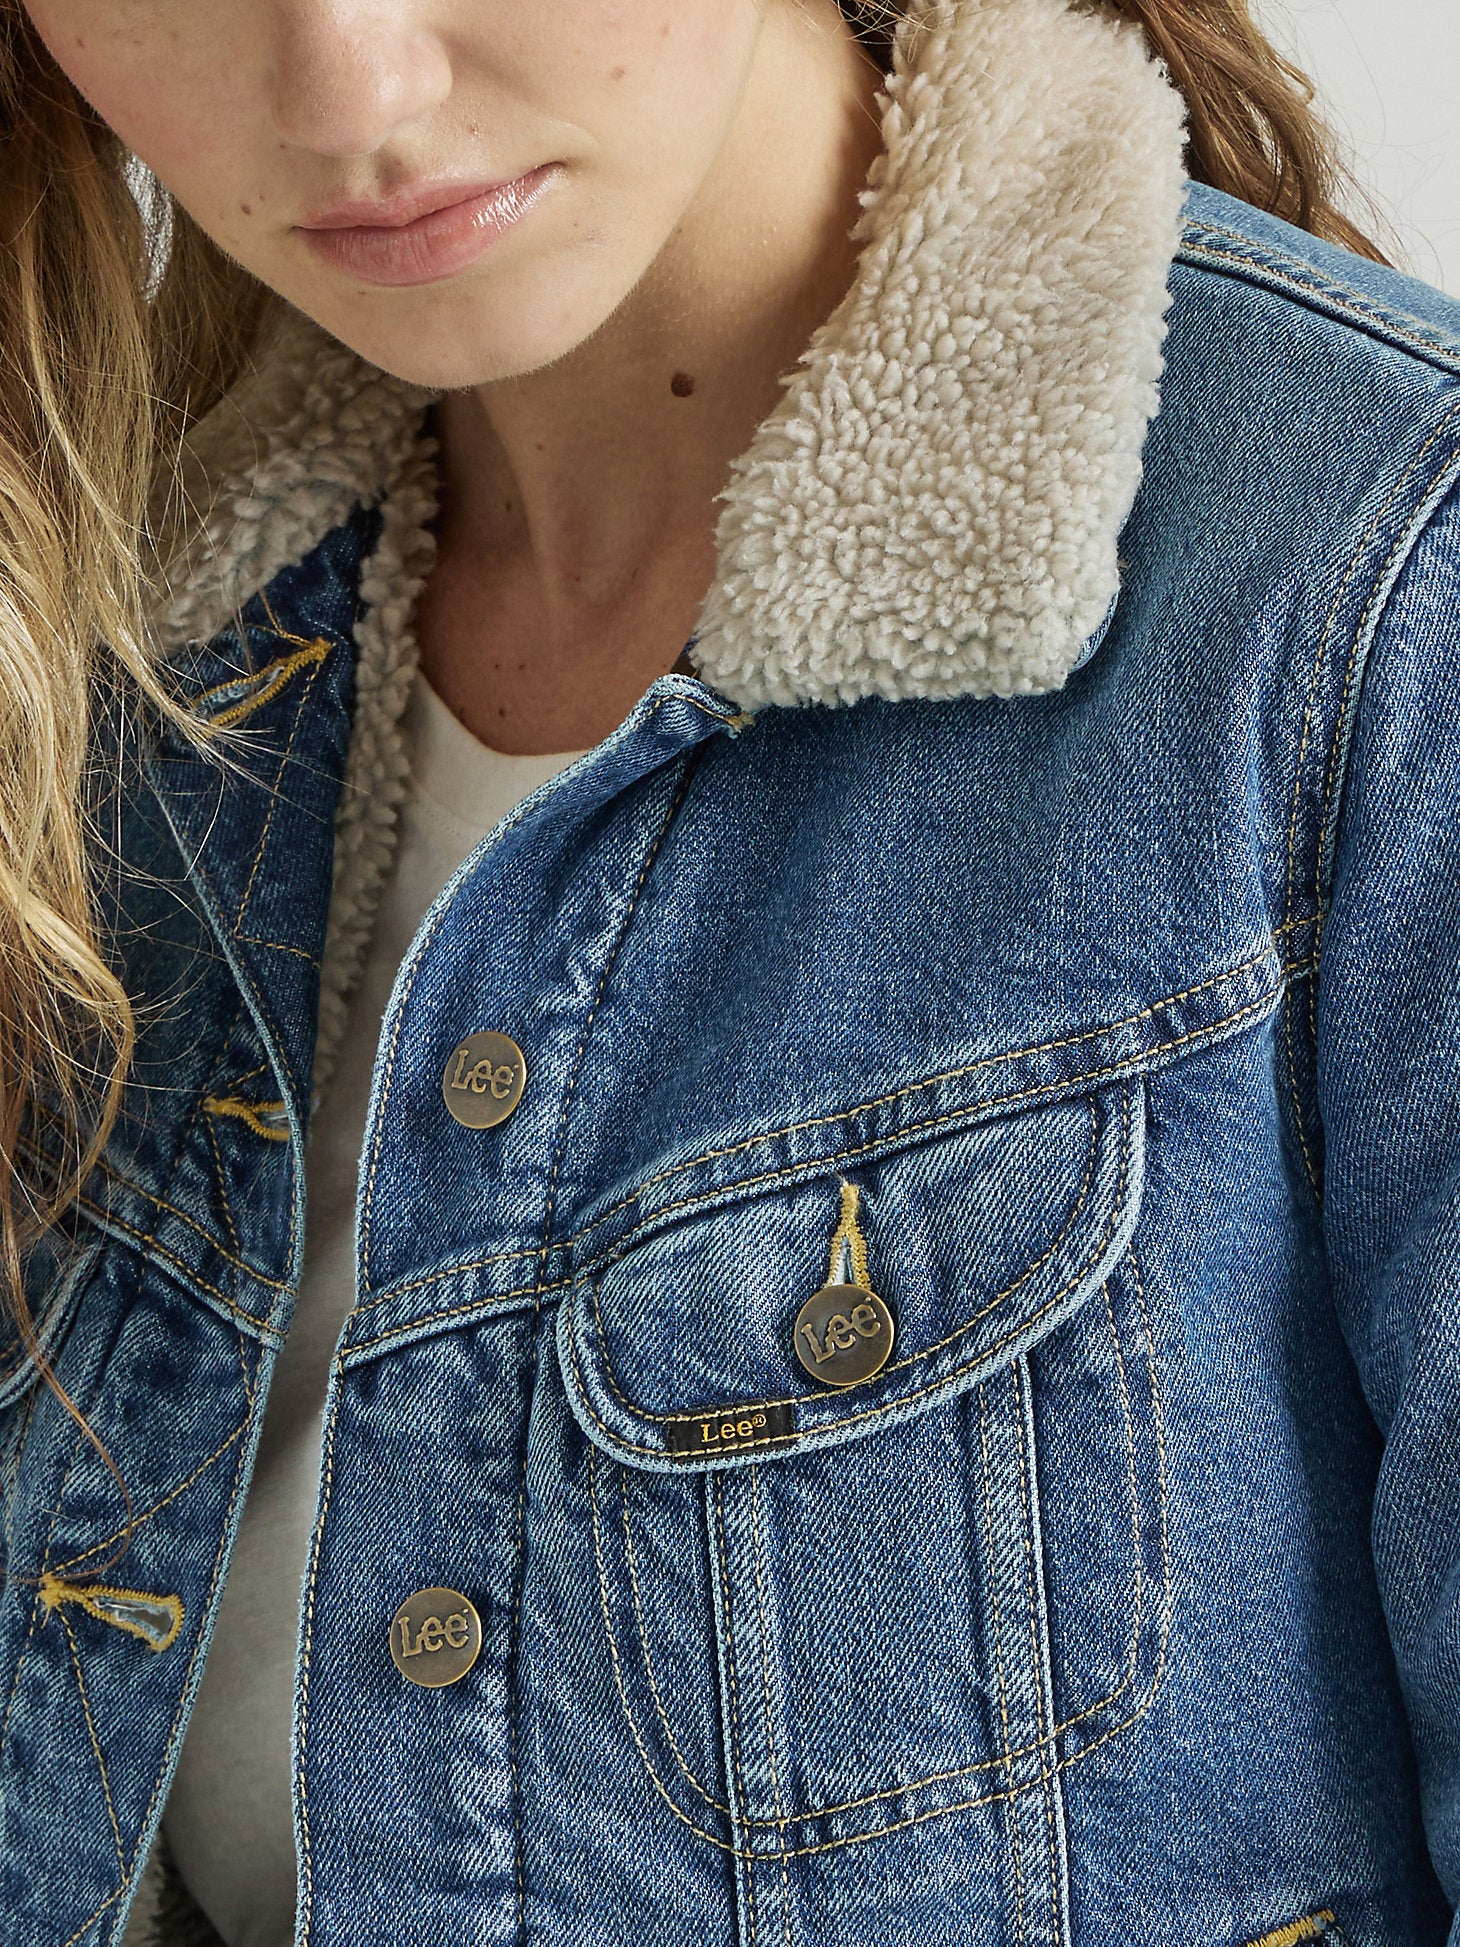 WOMEN'S RIDER SHERPA JACKET IN IN THE THRILL BLUE